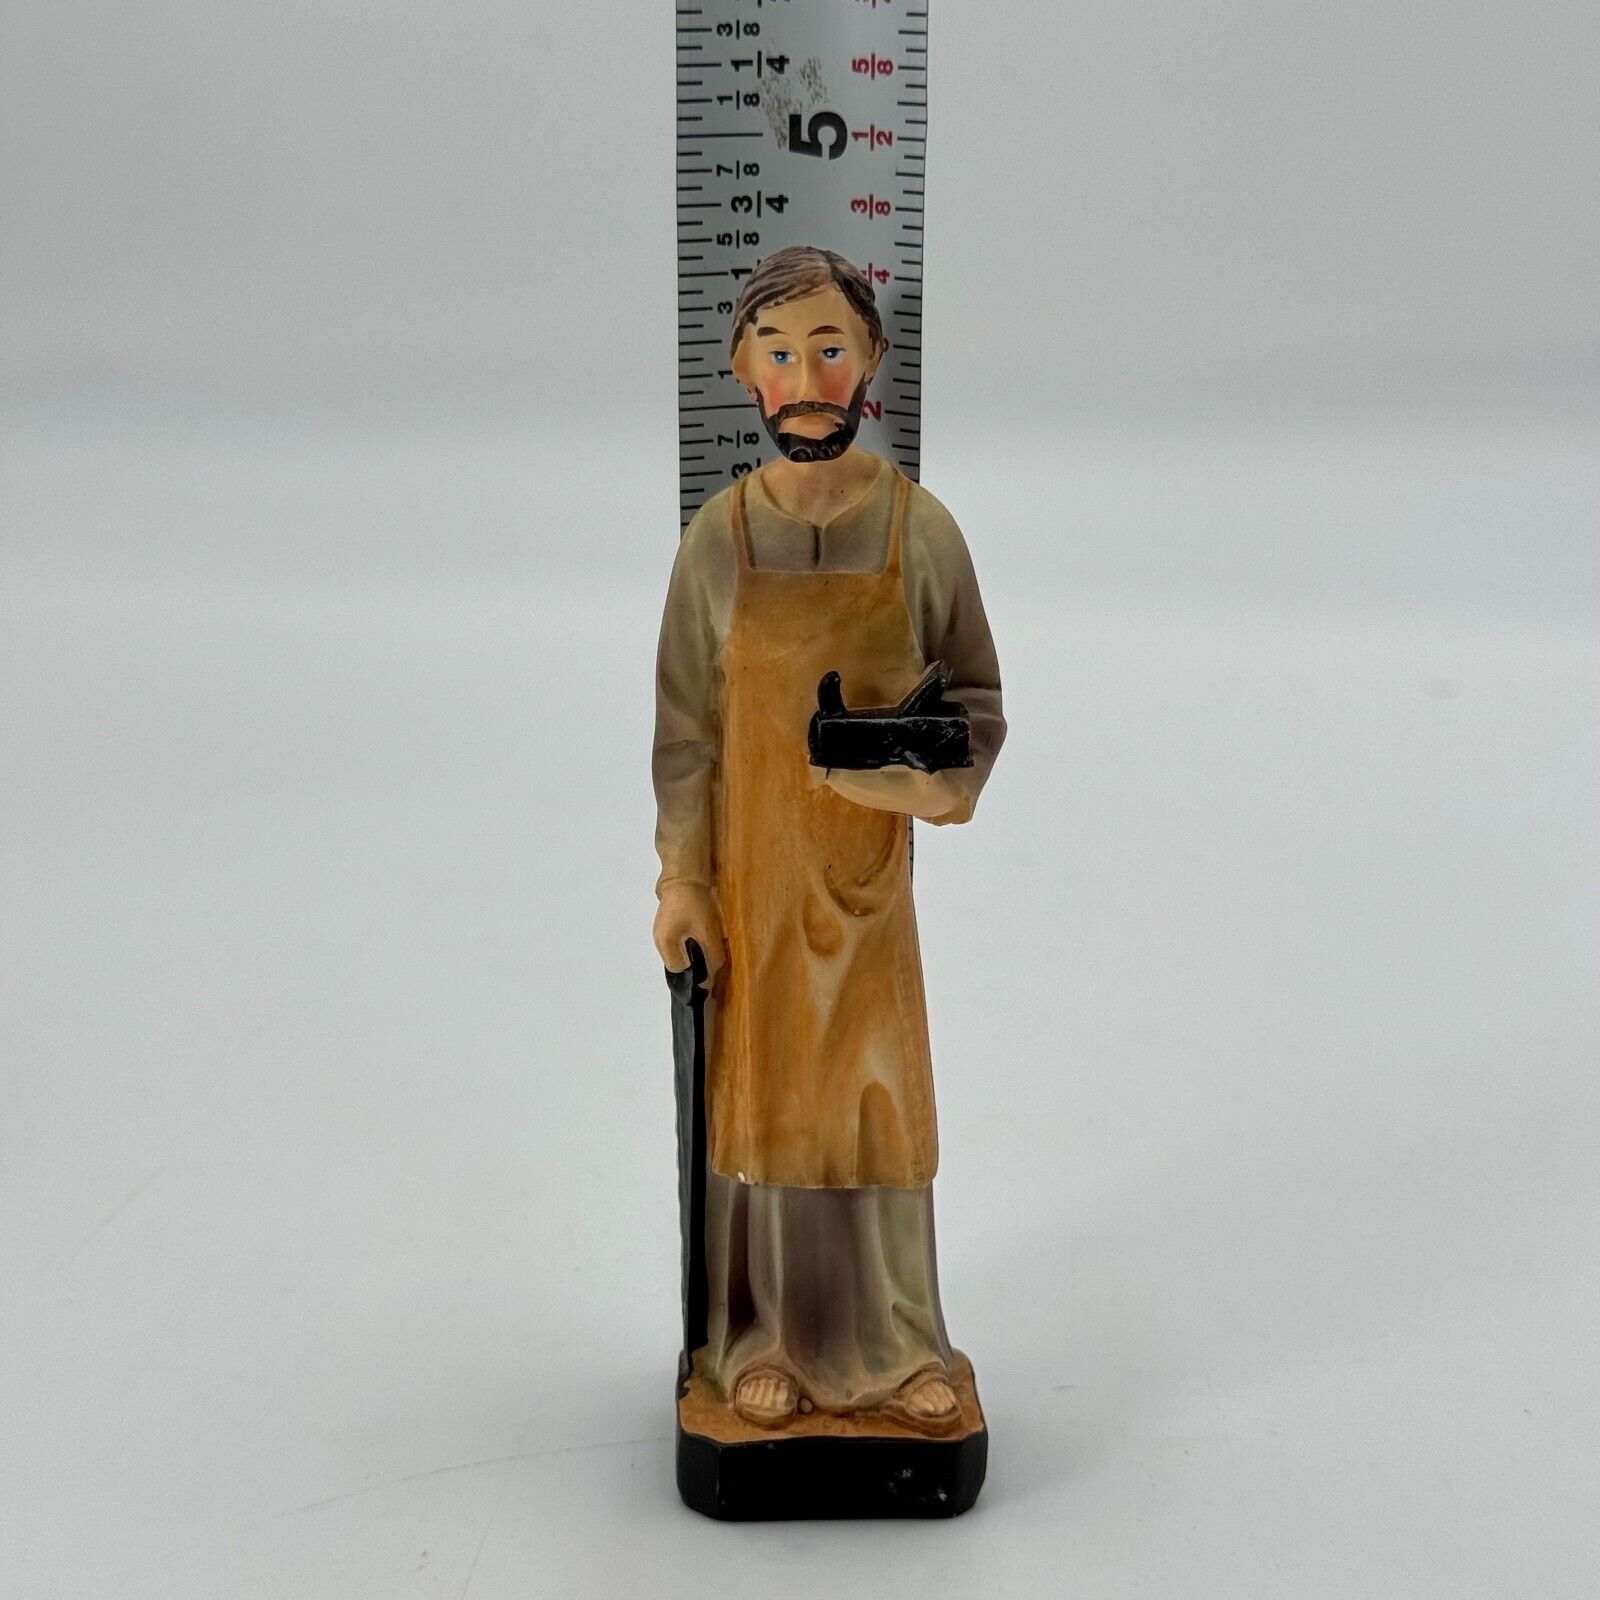 Saint Joseph 5” Figurine by Christian Brands Wood Worker Patron of a Happy Home